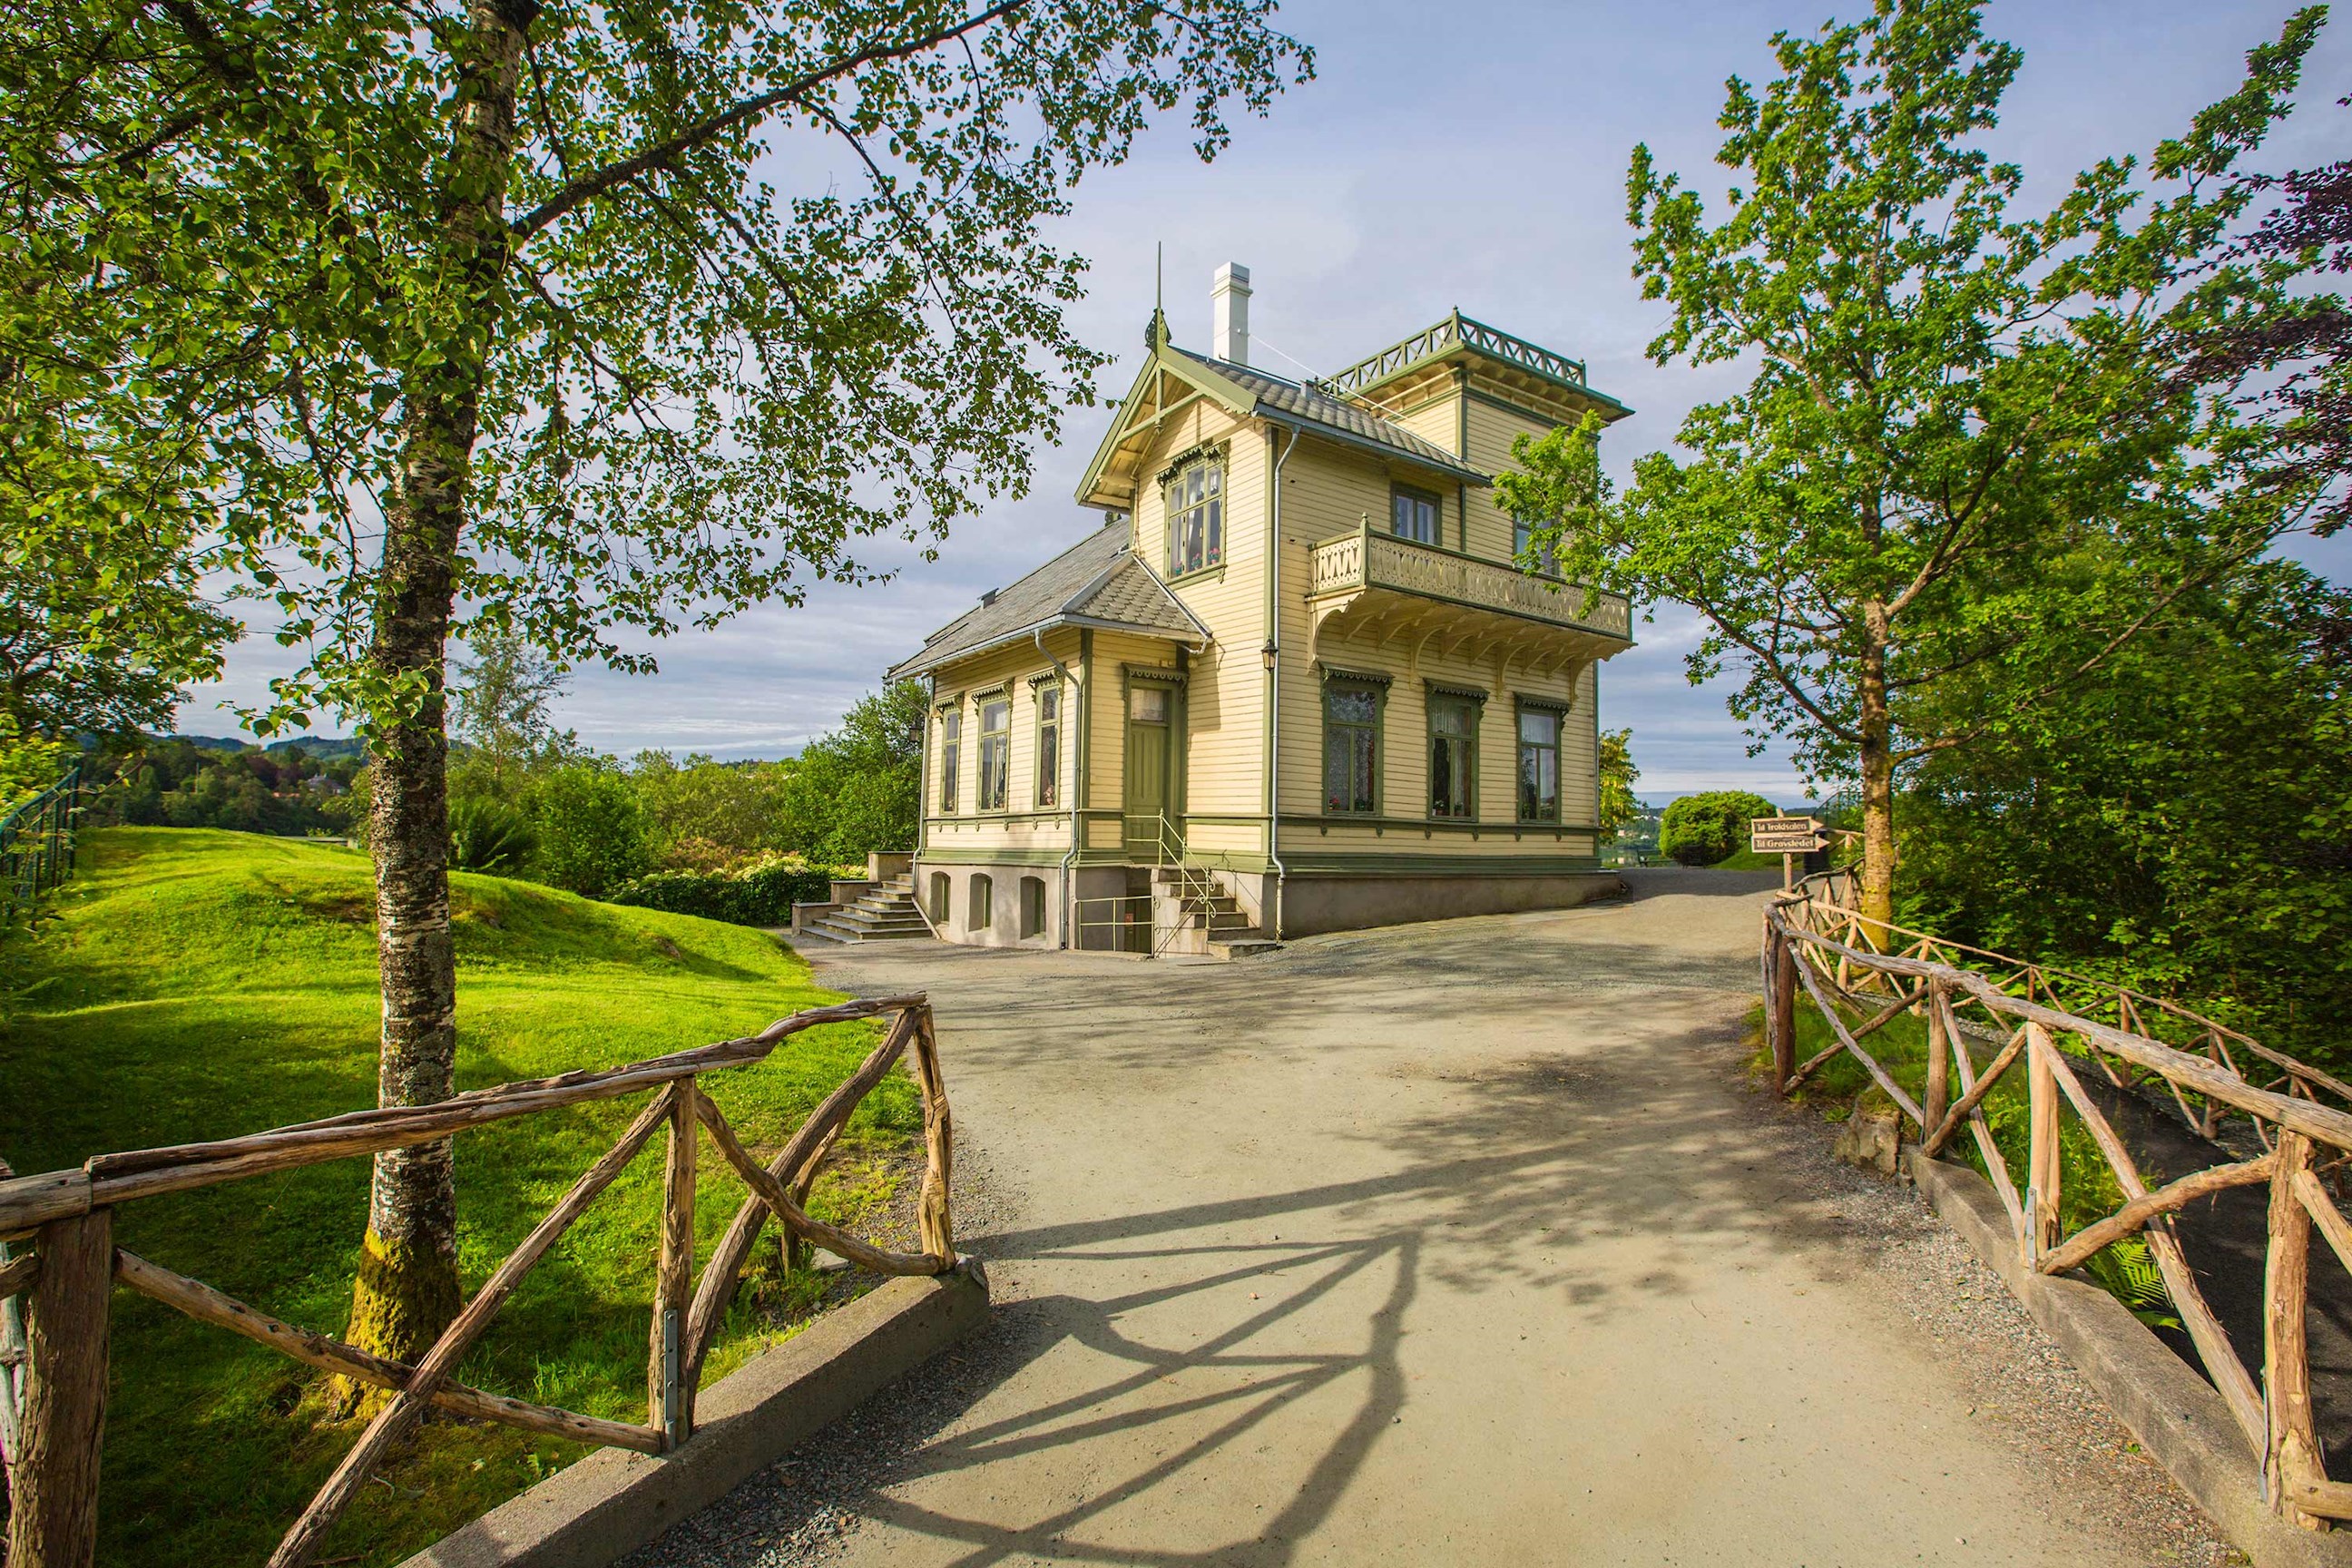 Visit Edvard Grieg's home with funicular in Bergen, Norway